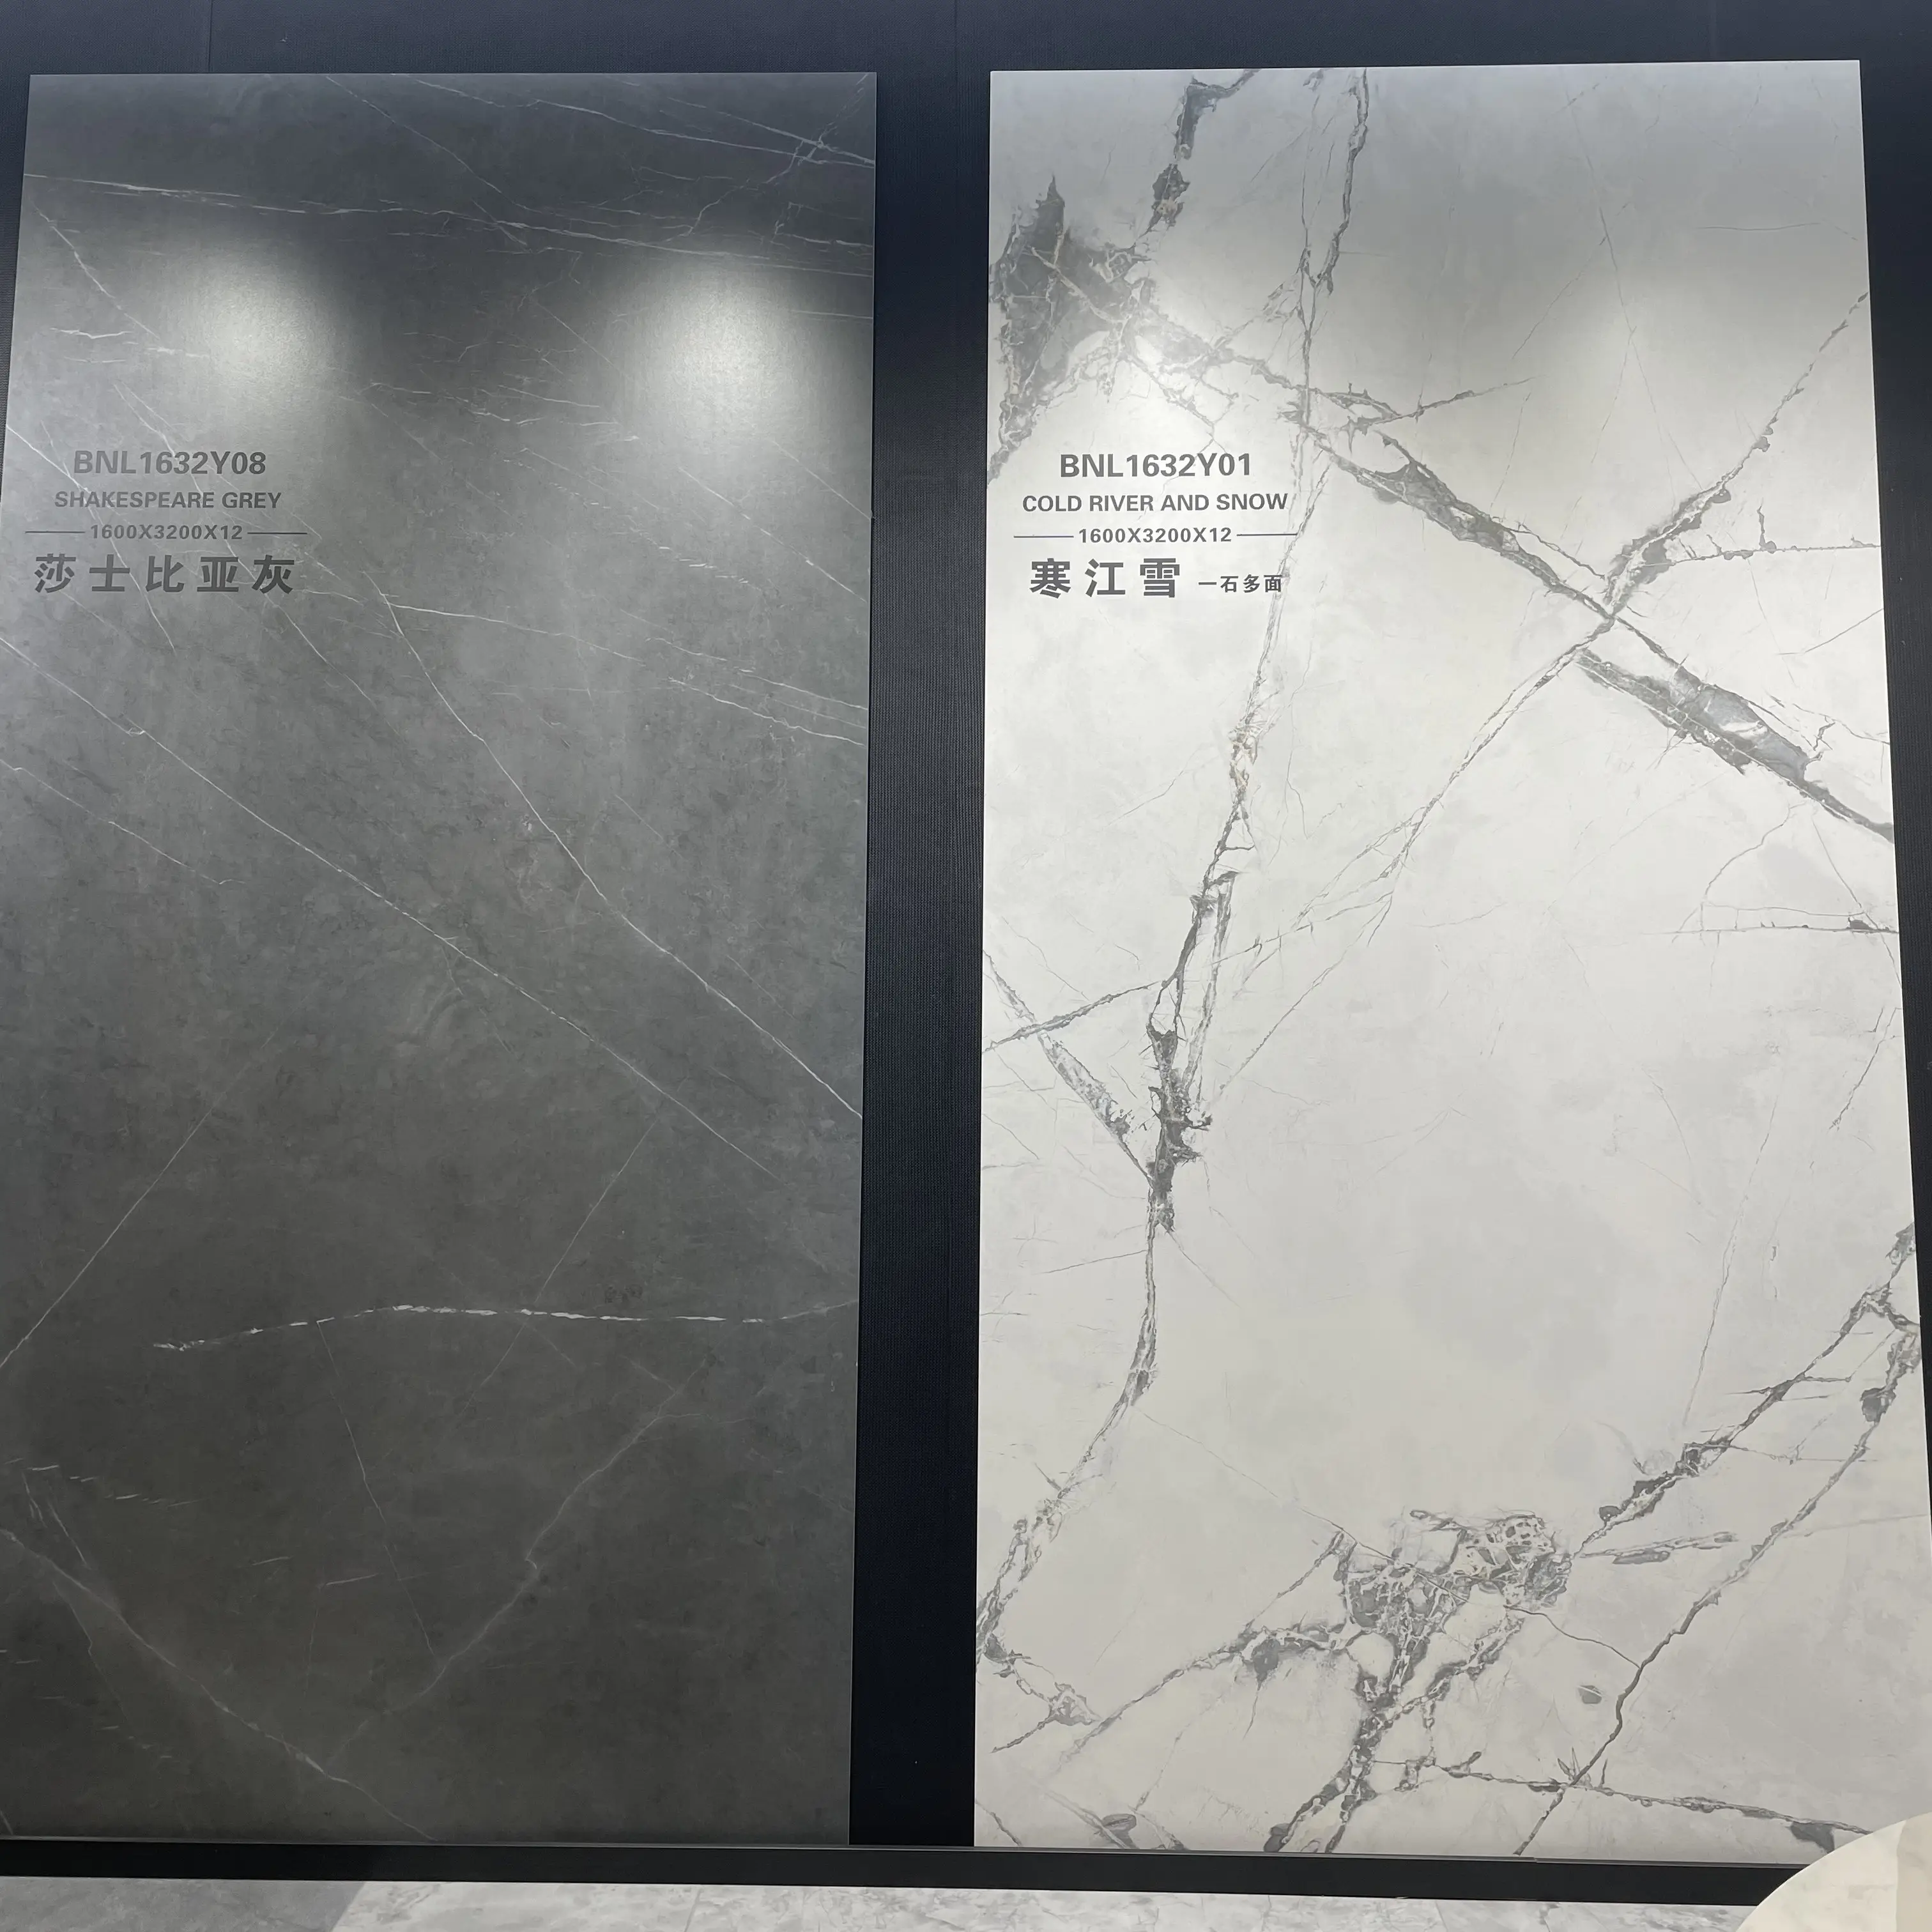 Sintered stone Modern Style New Trend 1600*3200*12mm Matte surface Porcelain Slab for Interior cold river snow